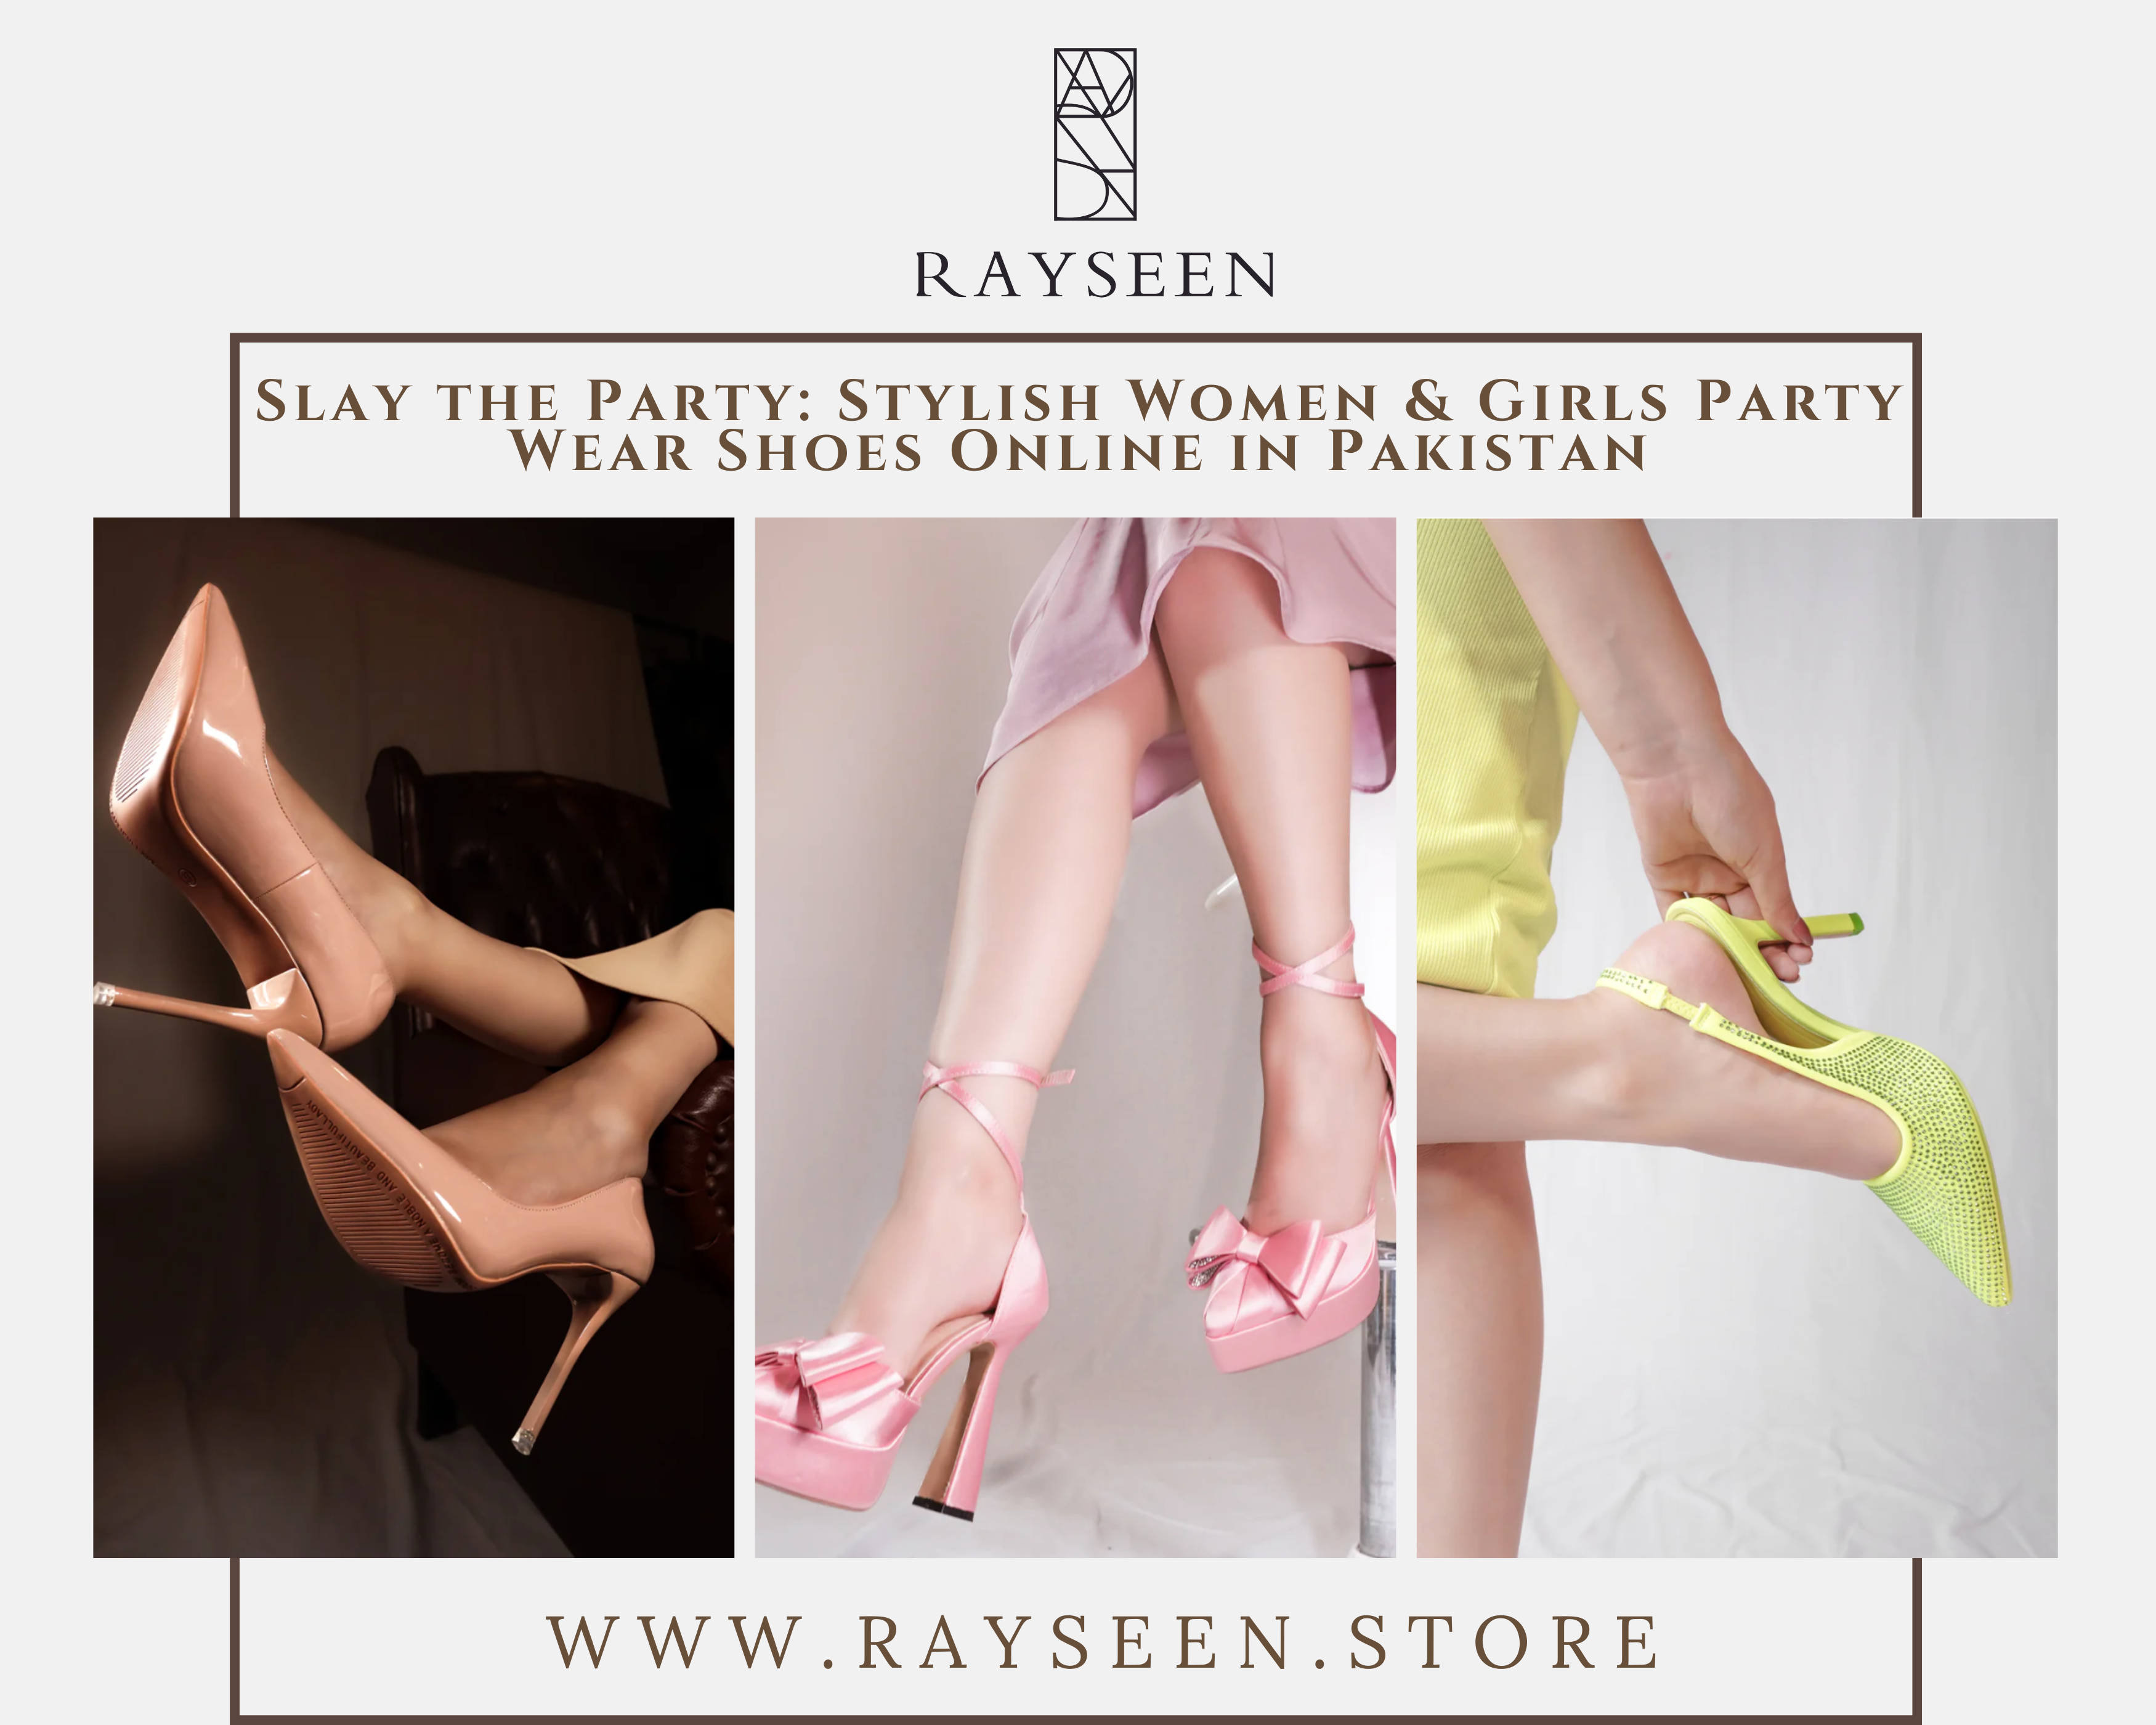 Slay the Party: Stylish Women & Girls Party Wear Shoes Online in Pakistan